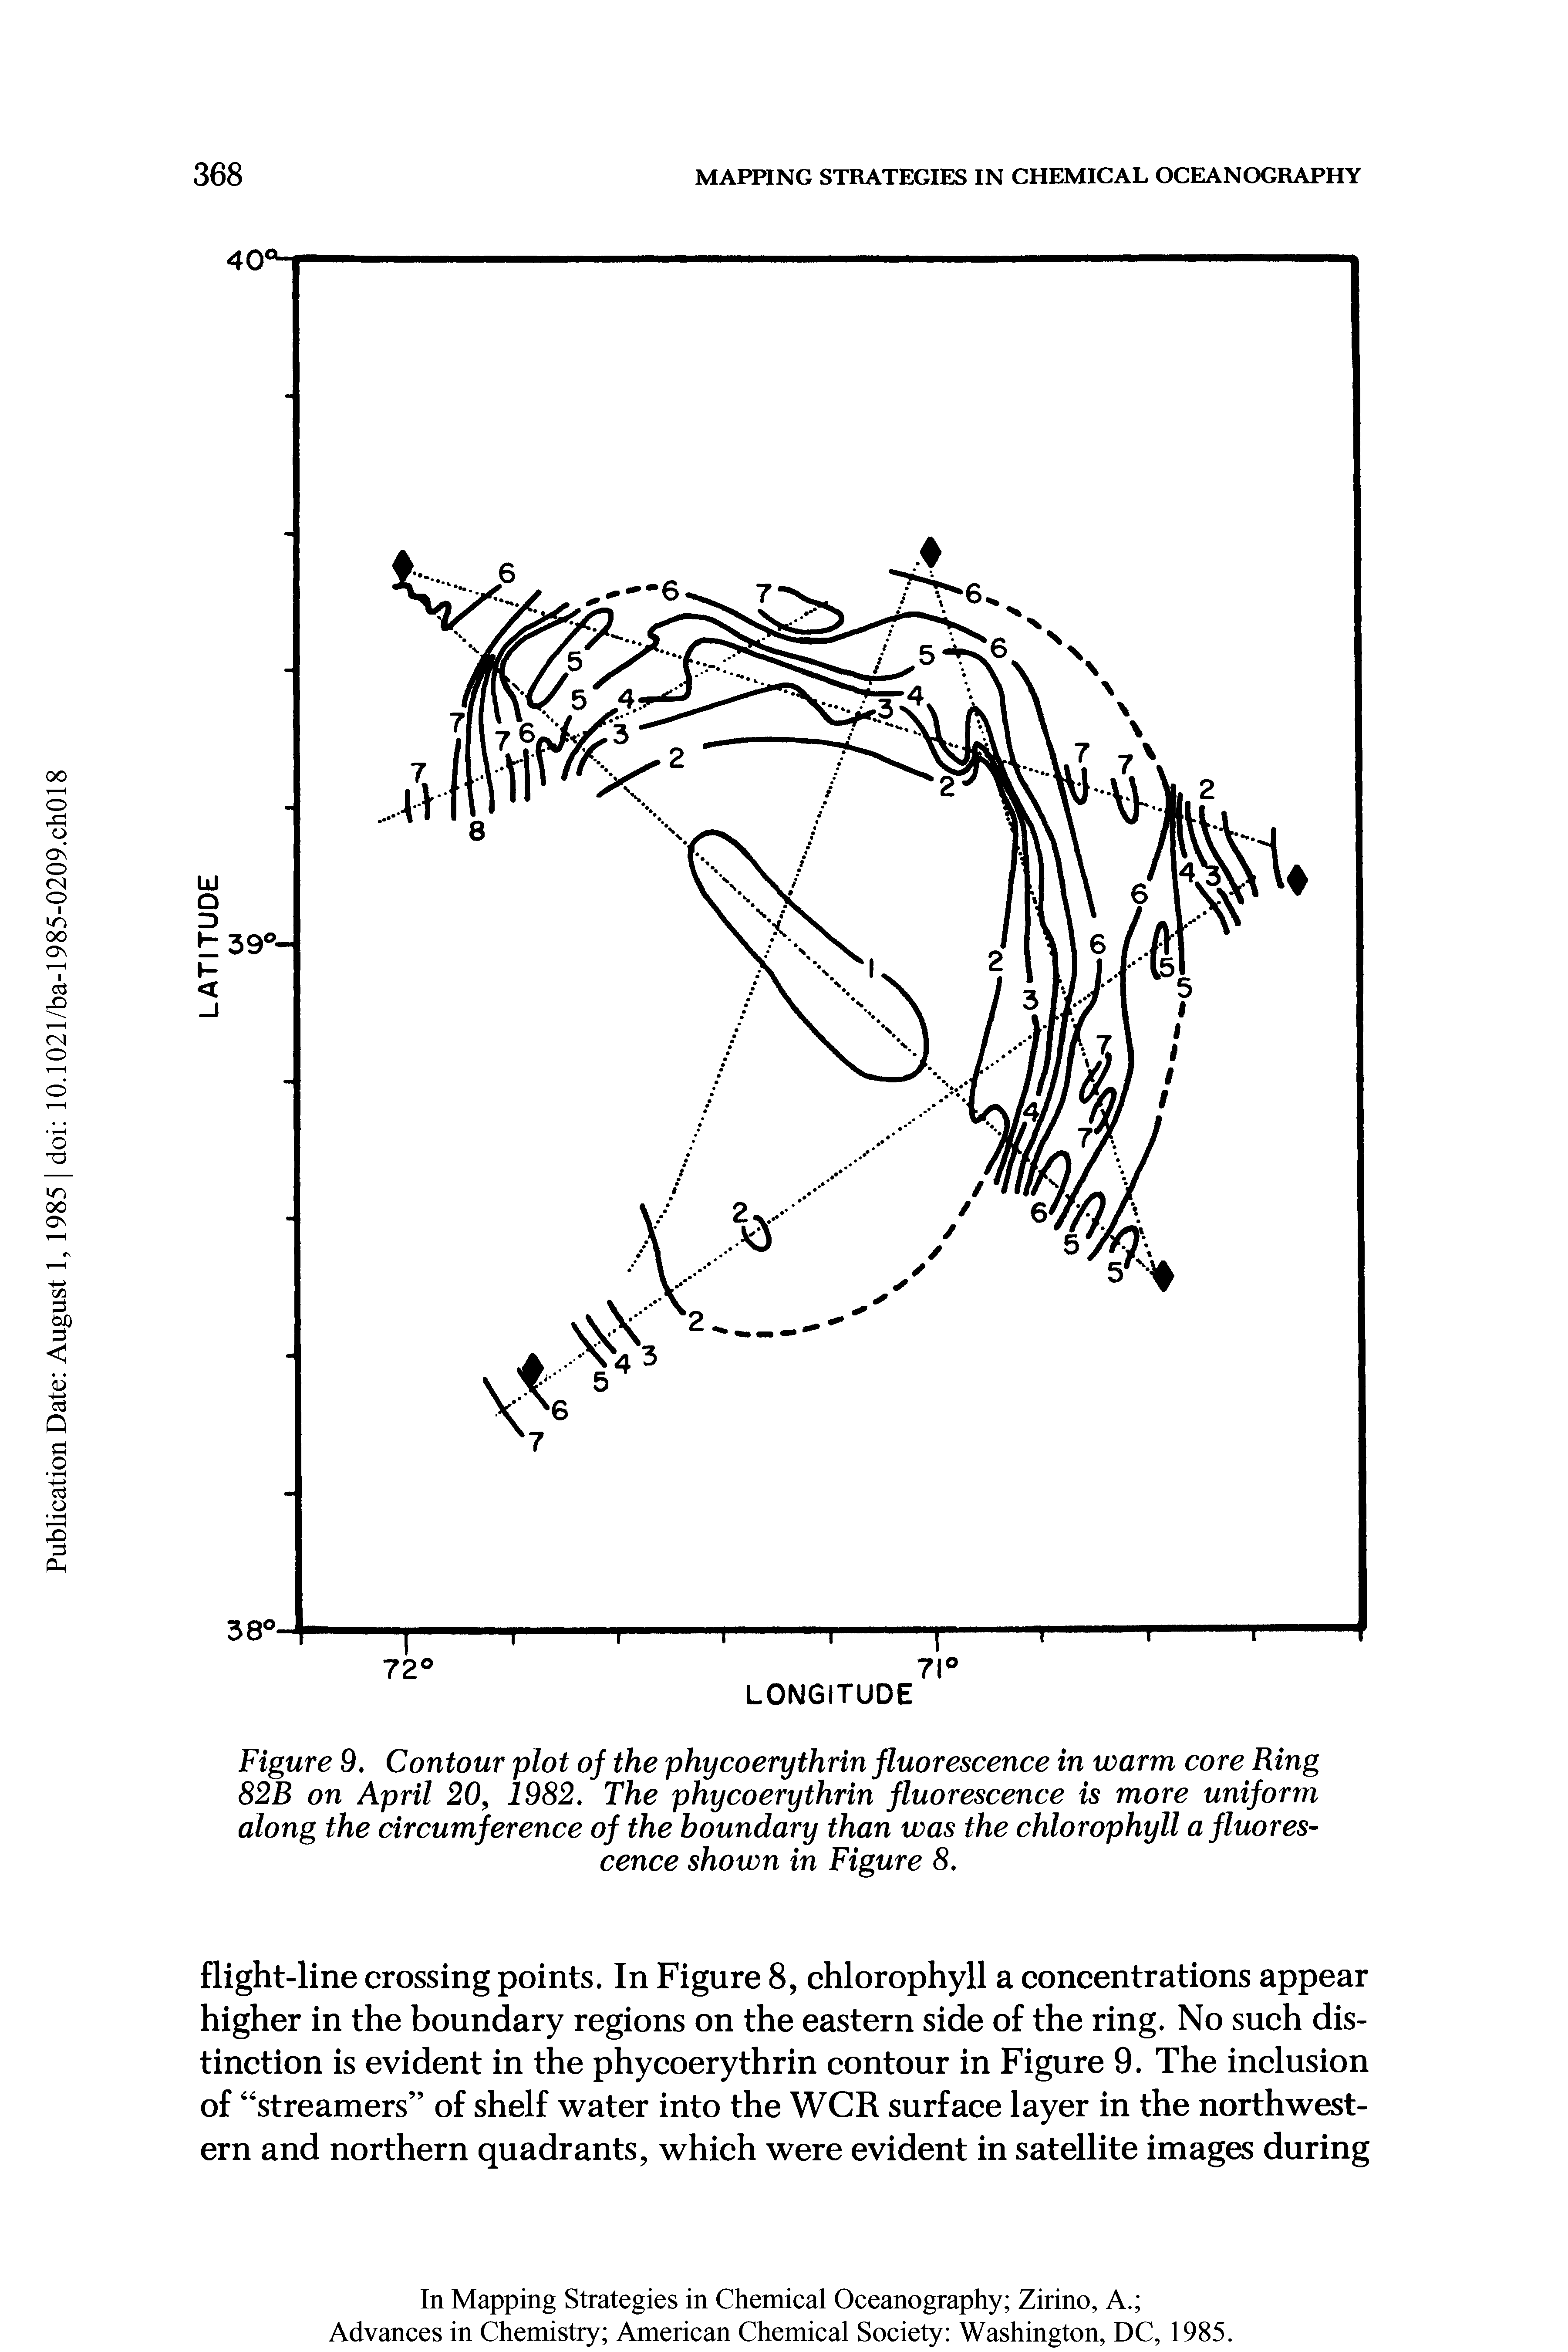 Figure 9. Contour plot of the phycoerythrin fluorescence in warm core Ring 82B on April 20, 1982. The phycoerythrin fluorescence is more uniform along the circumference of the boundary than was the chlorophyll a fluorescence shown in Figure 8.